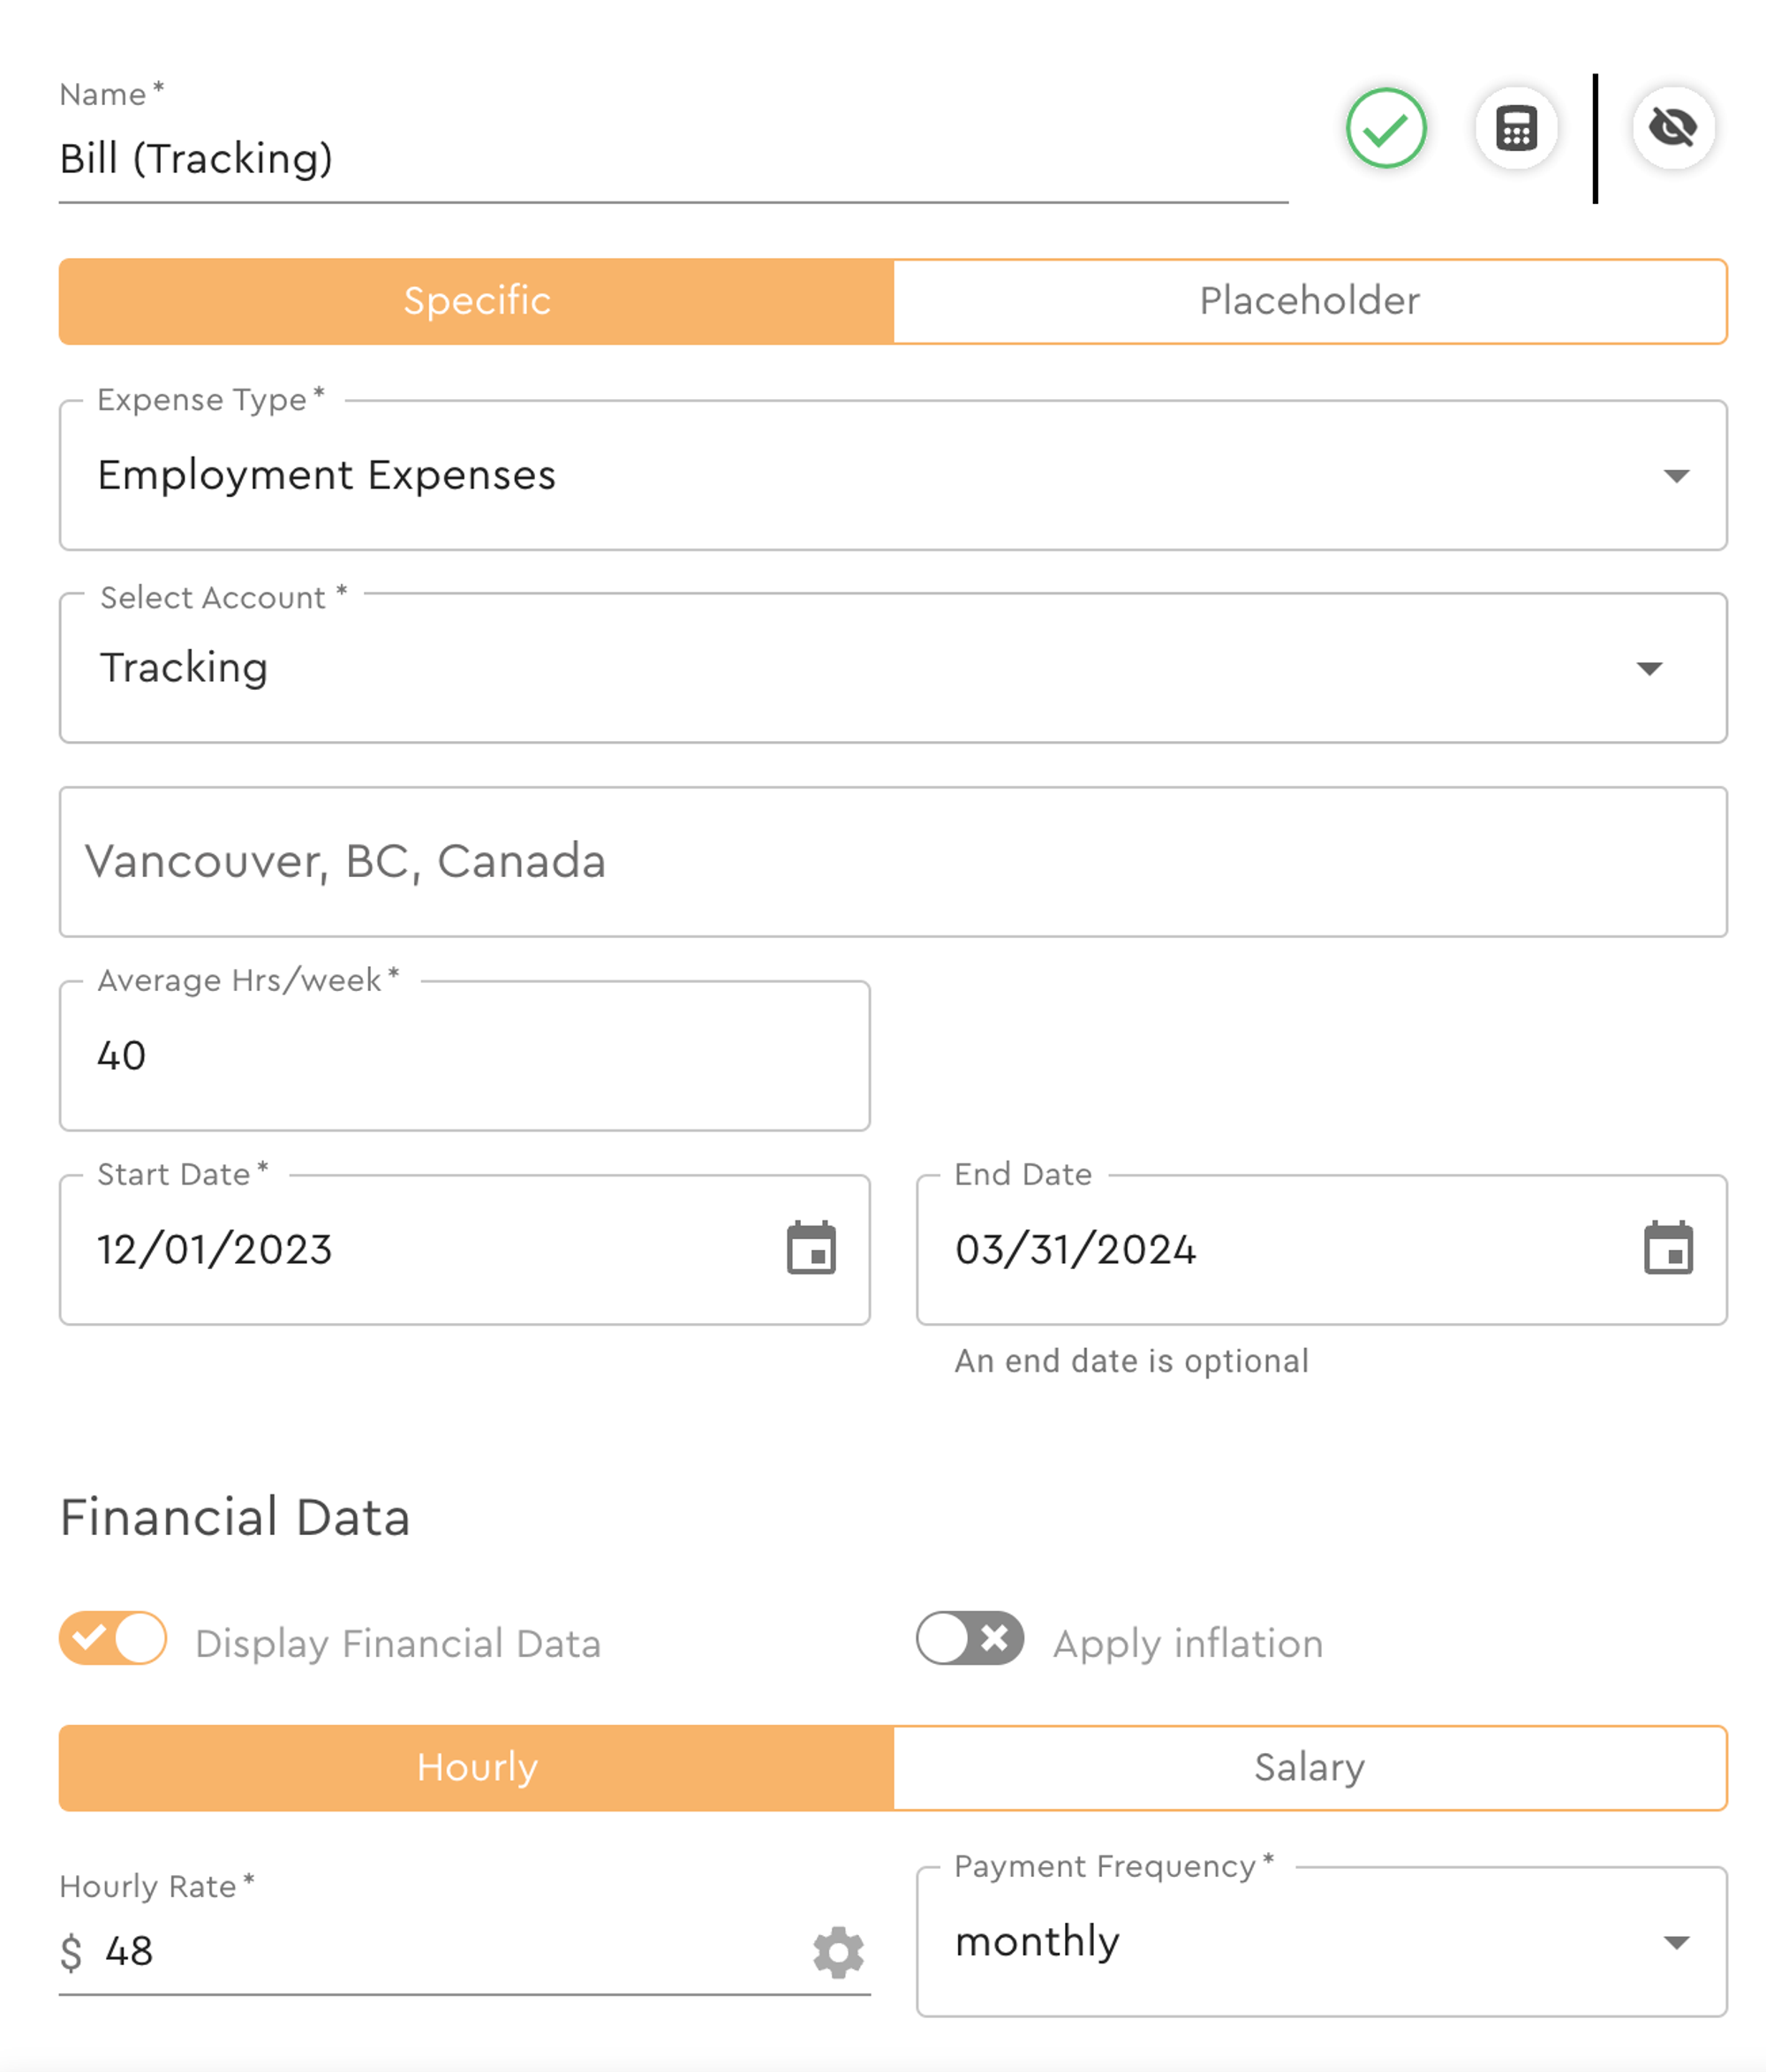 Interface for an individual employee and an hourly rate calculation.